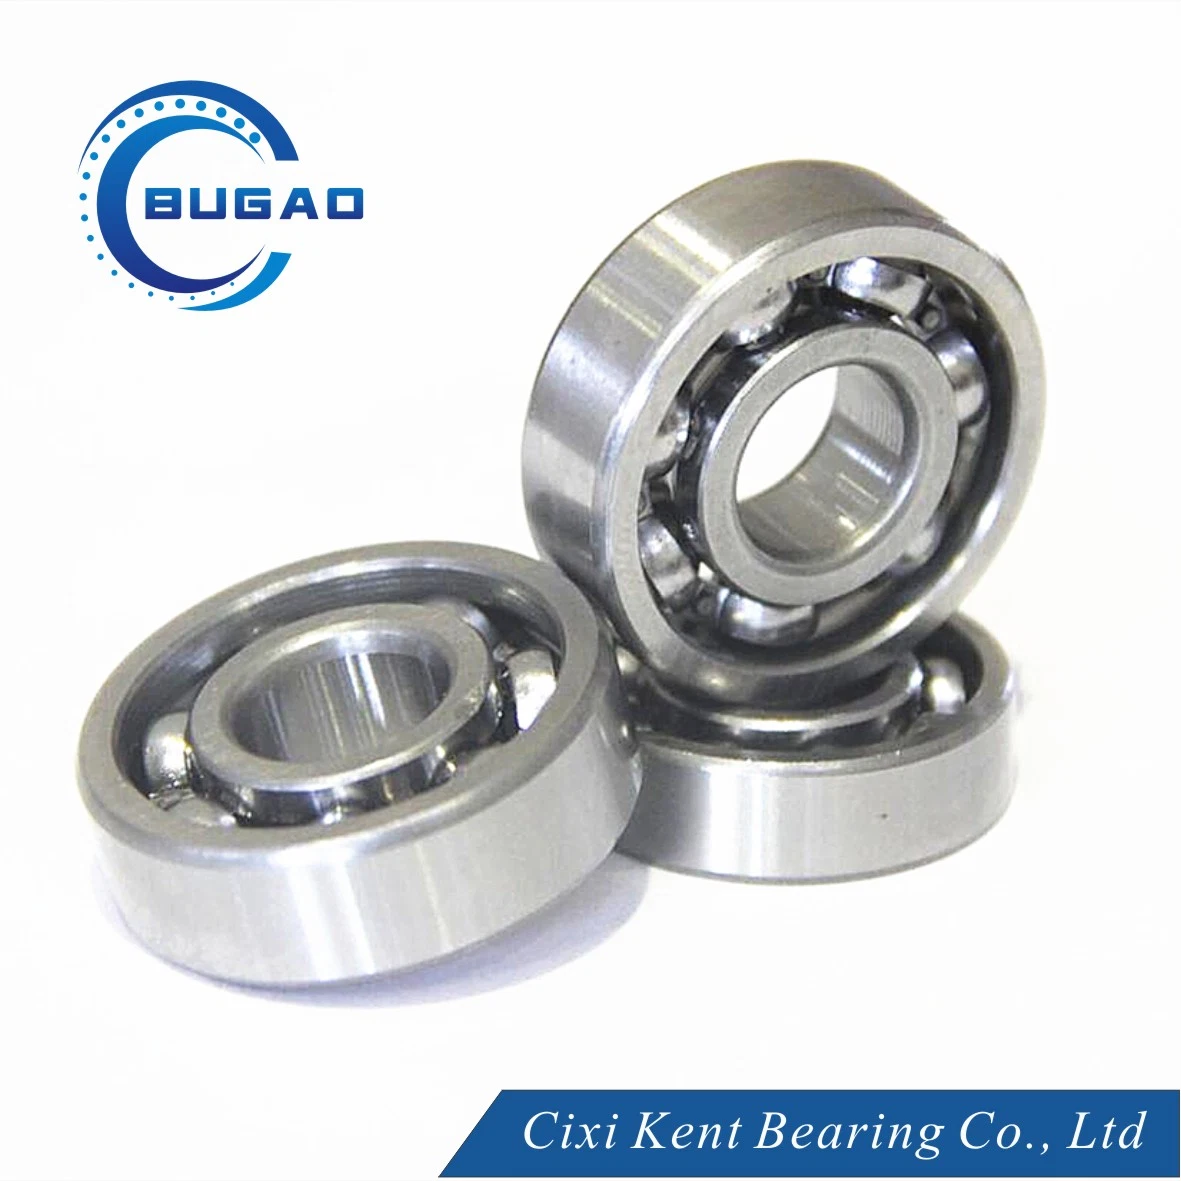 Universal Bearing Hardware Parts for Auto Spare Parts 6307 6308 6309 6310 6311 6312 Zz 2RS RS Bearing